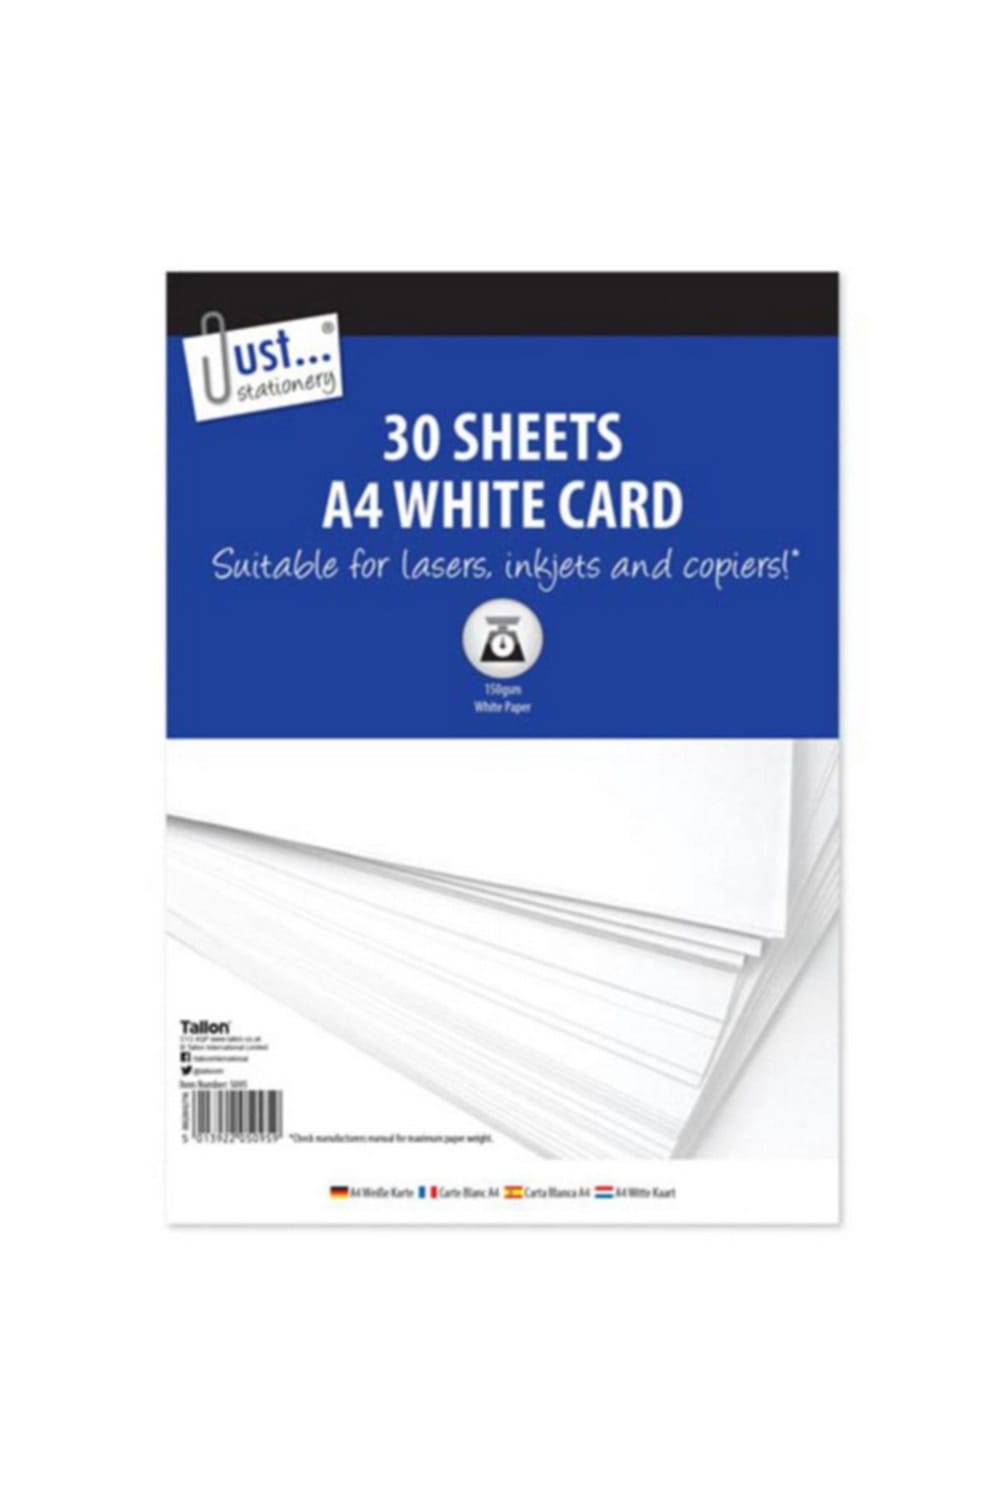 Just Stationery 30 X 150 GSM Sheets A4 White Cards Pack Of 30 (White) (Pack Of 30)